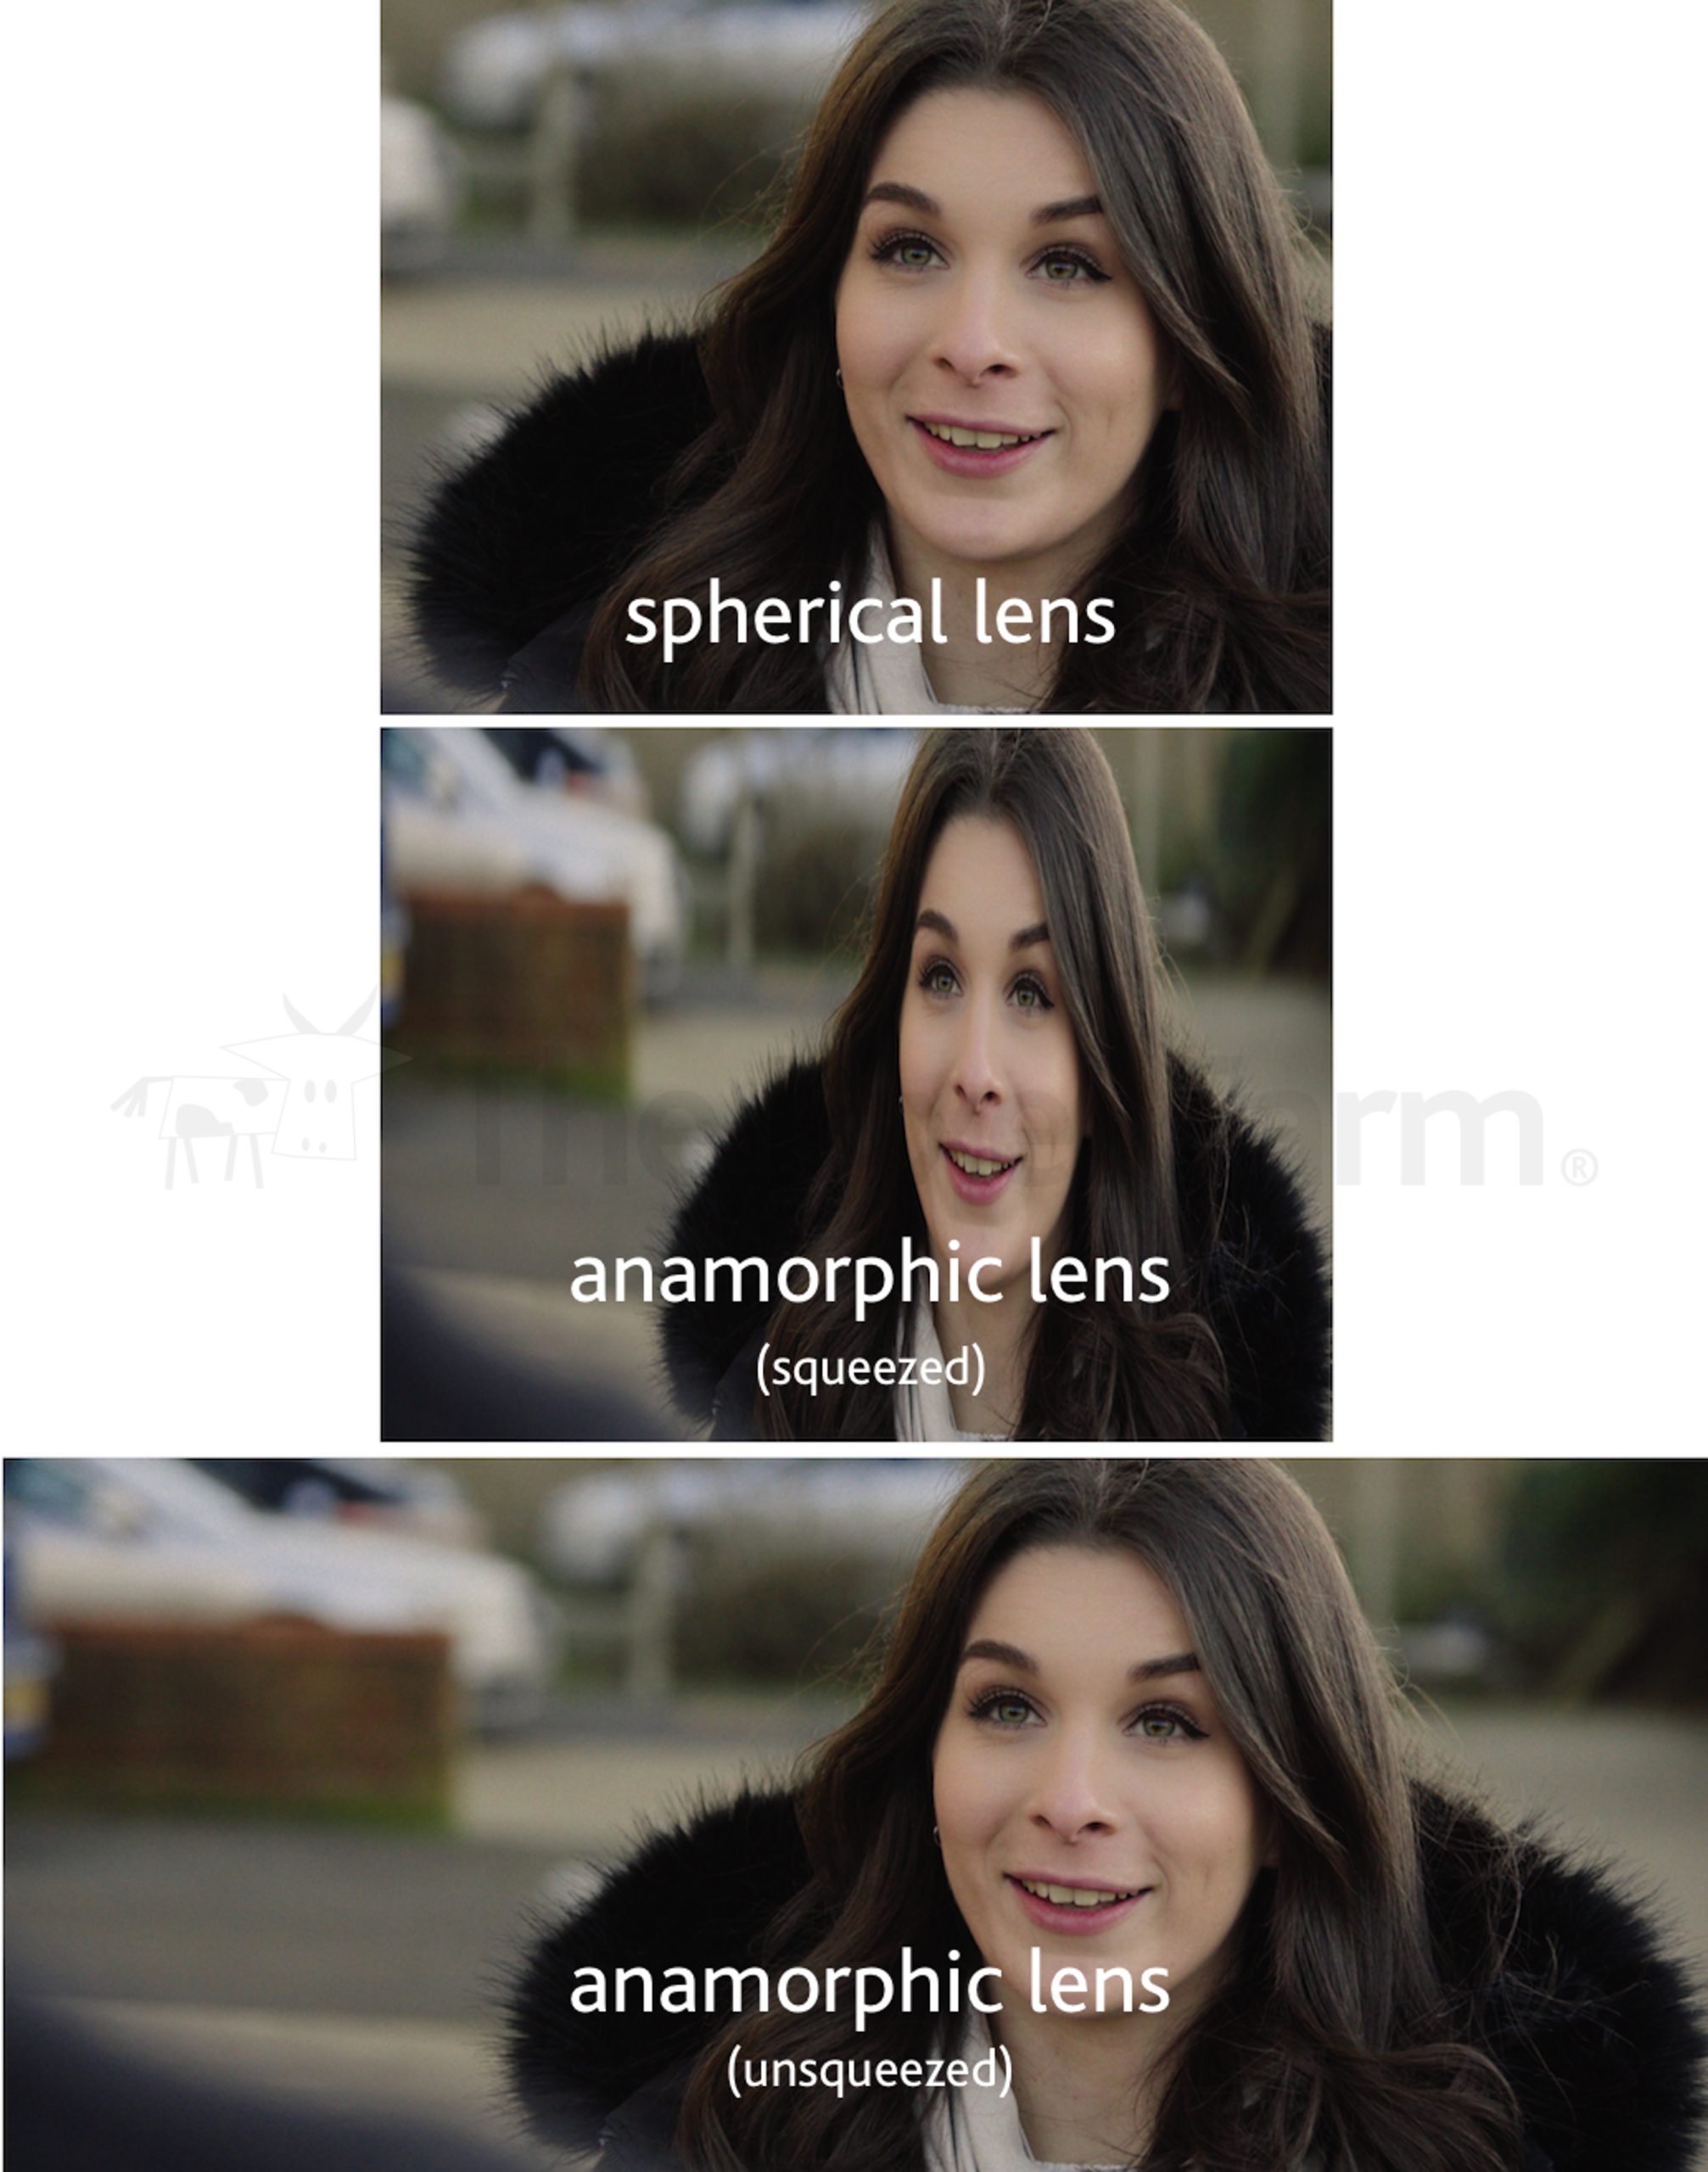 example of spherical and anamorphic images